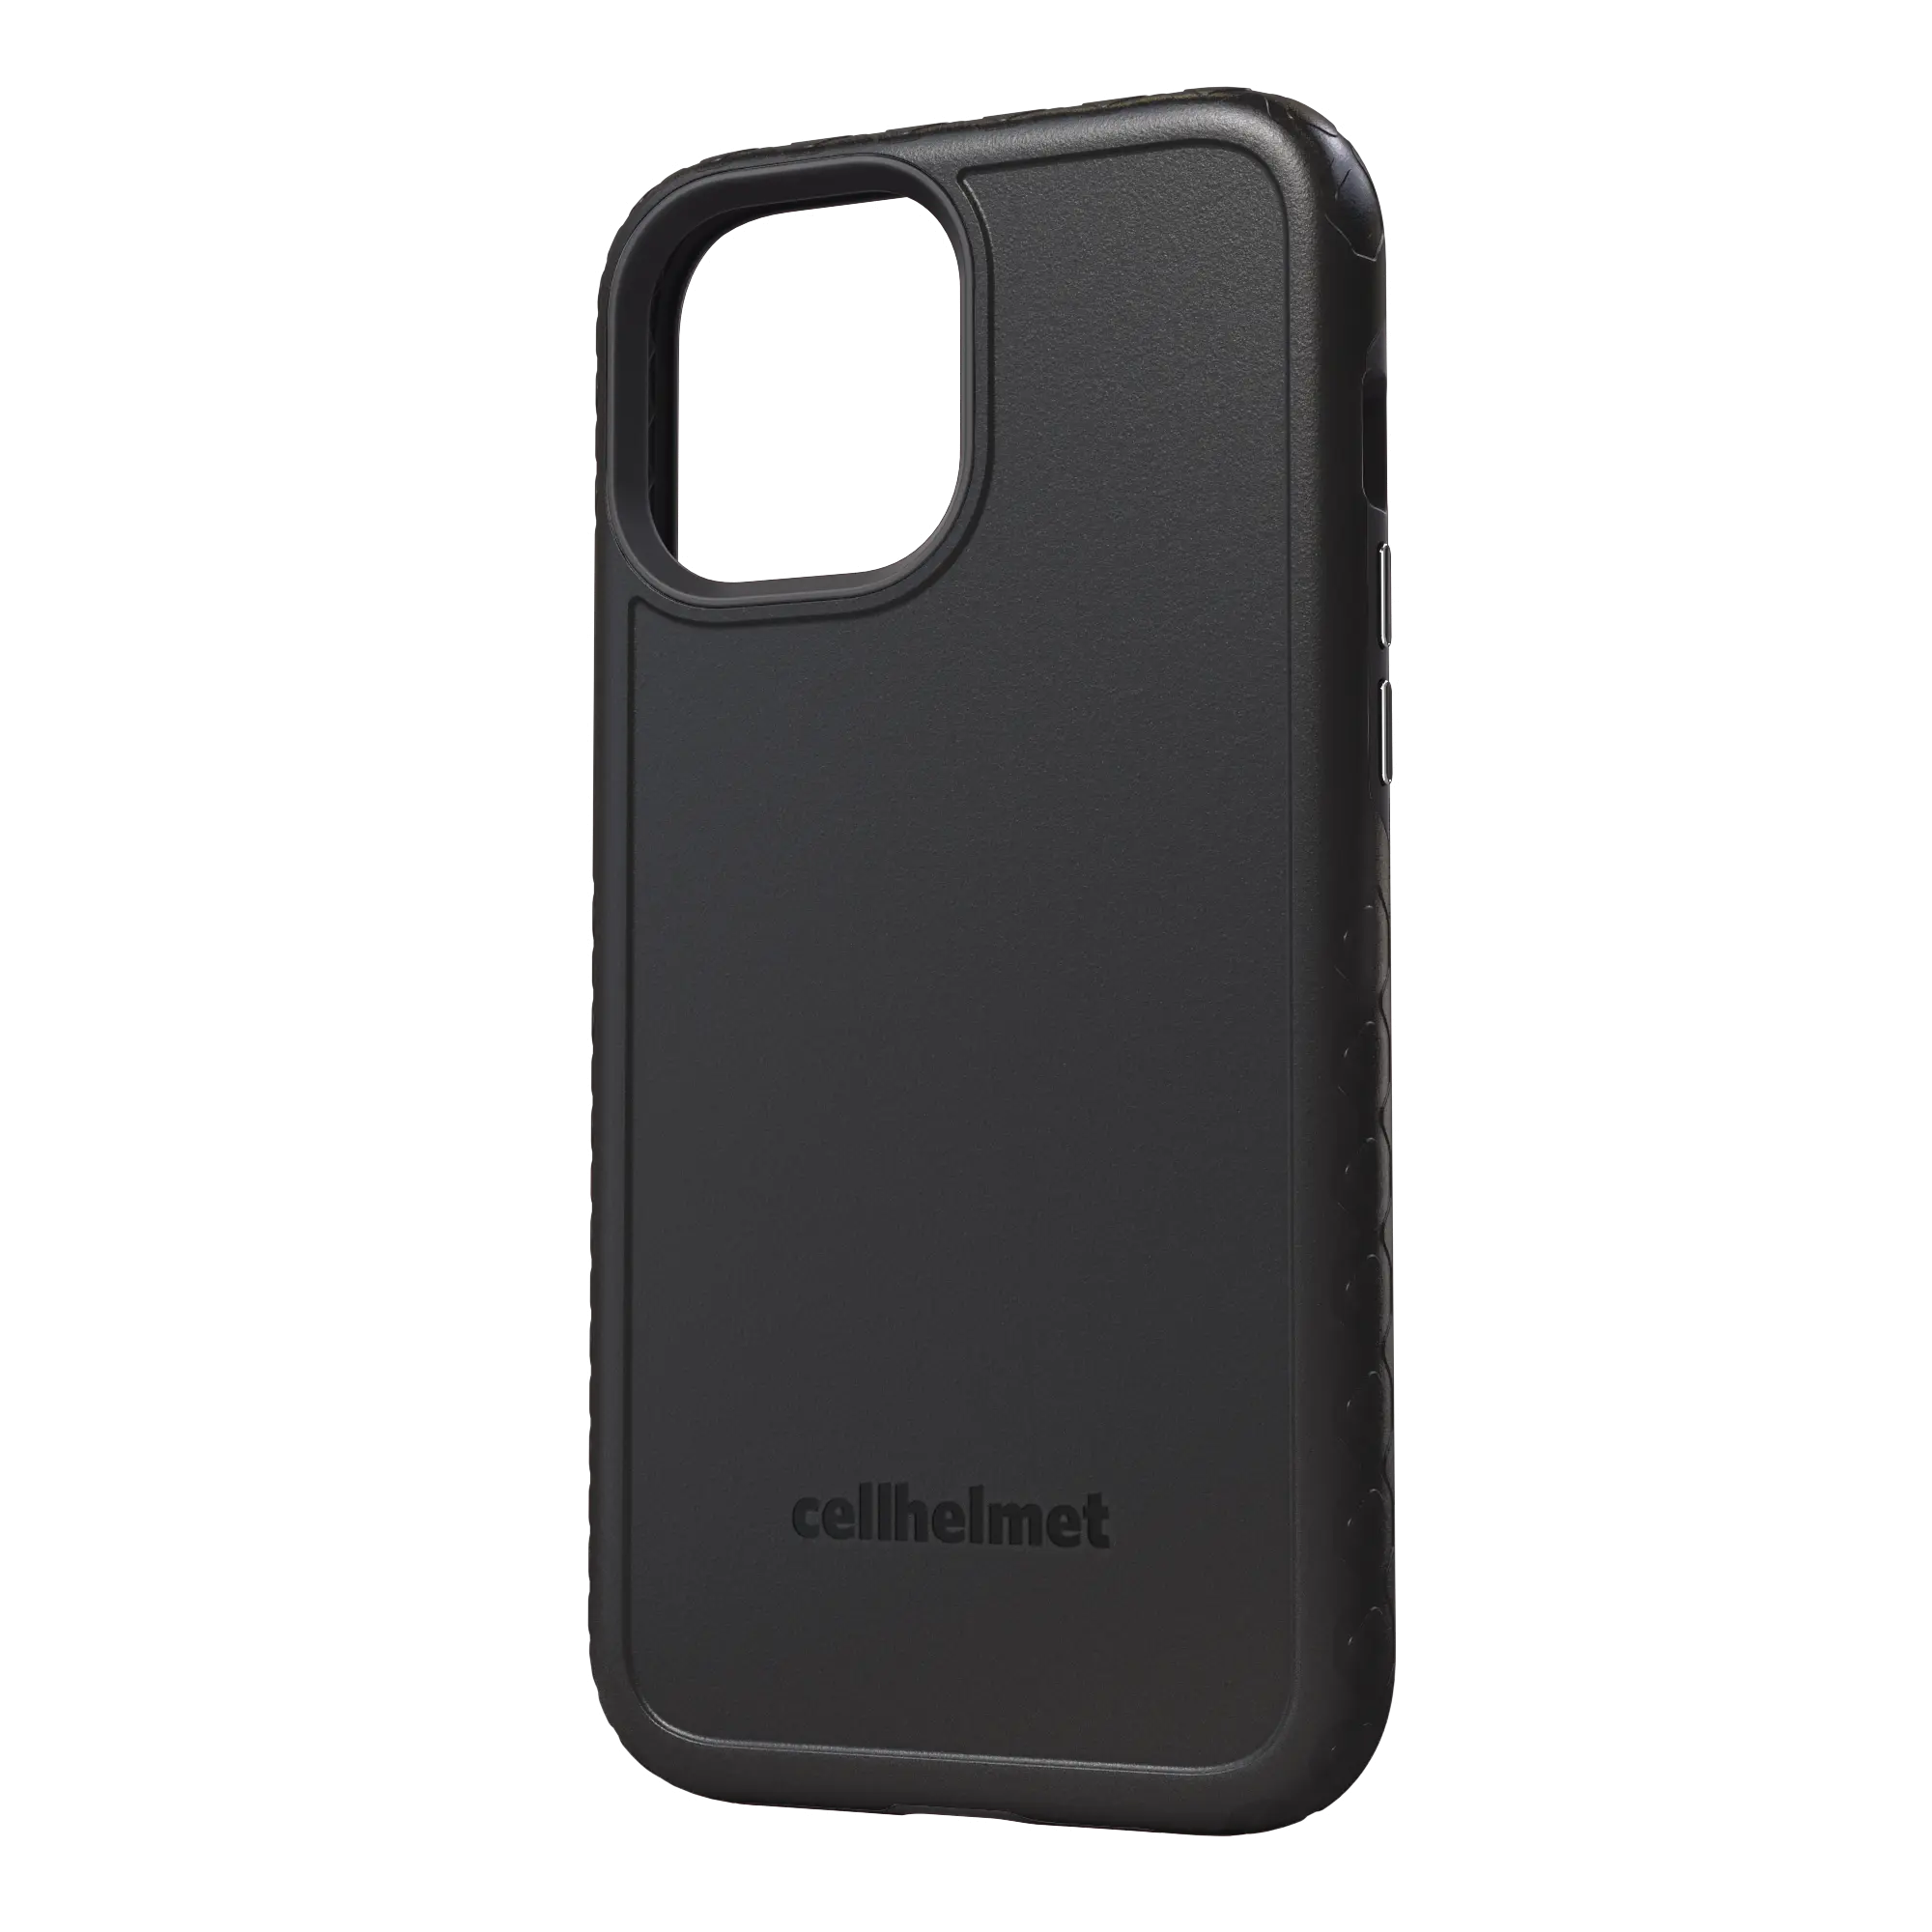 Black cellhelmet Personalized Case for iPhone 12 Pro Max